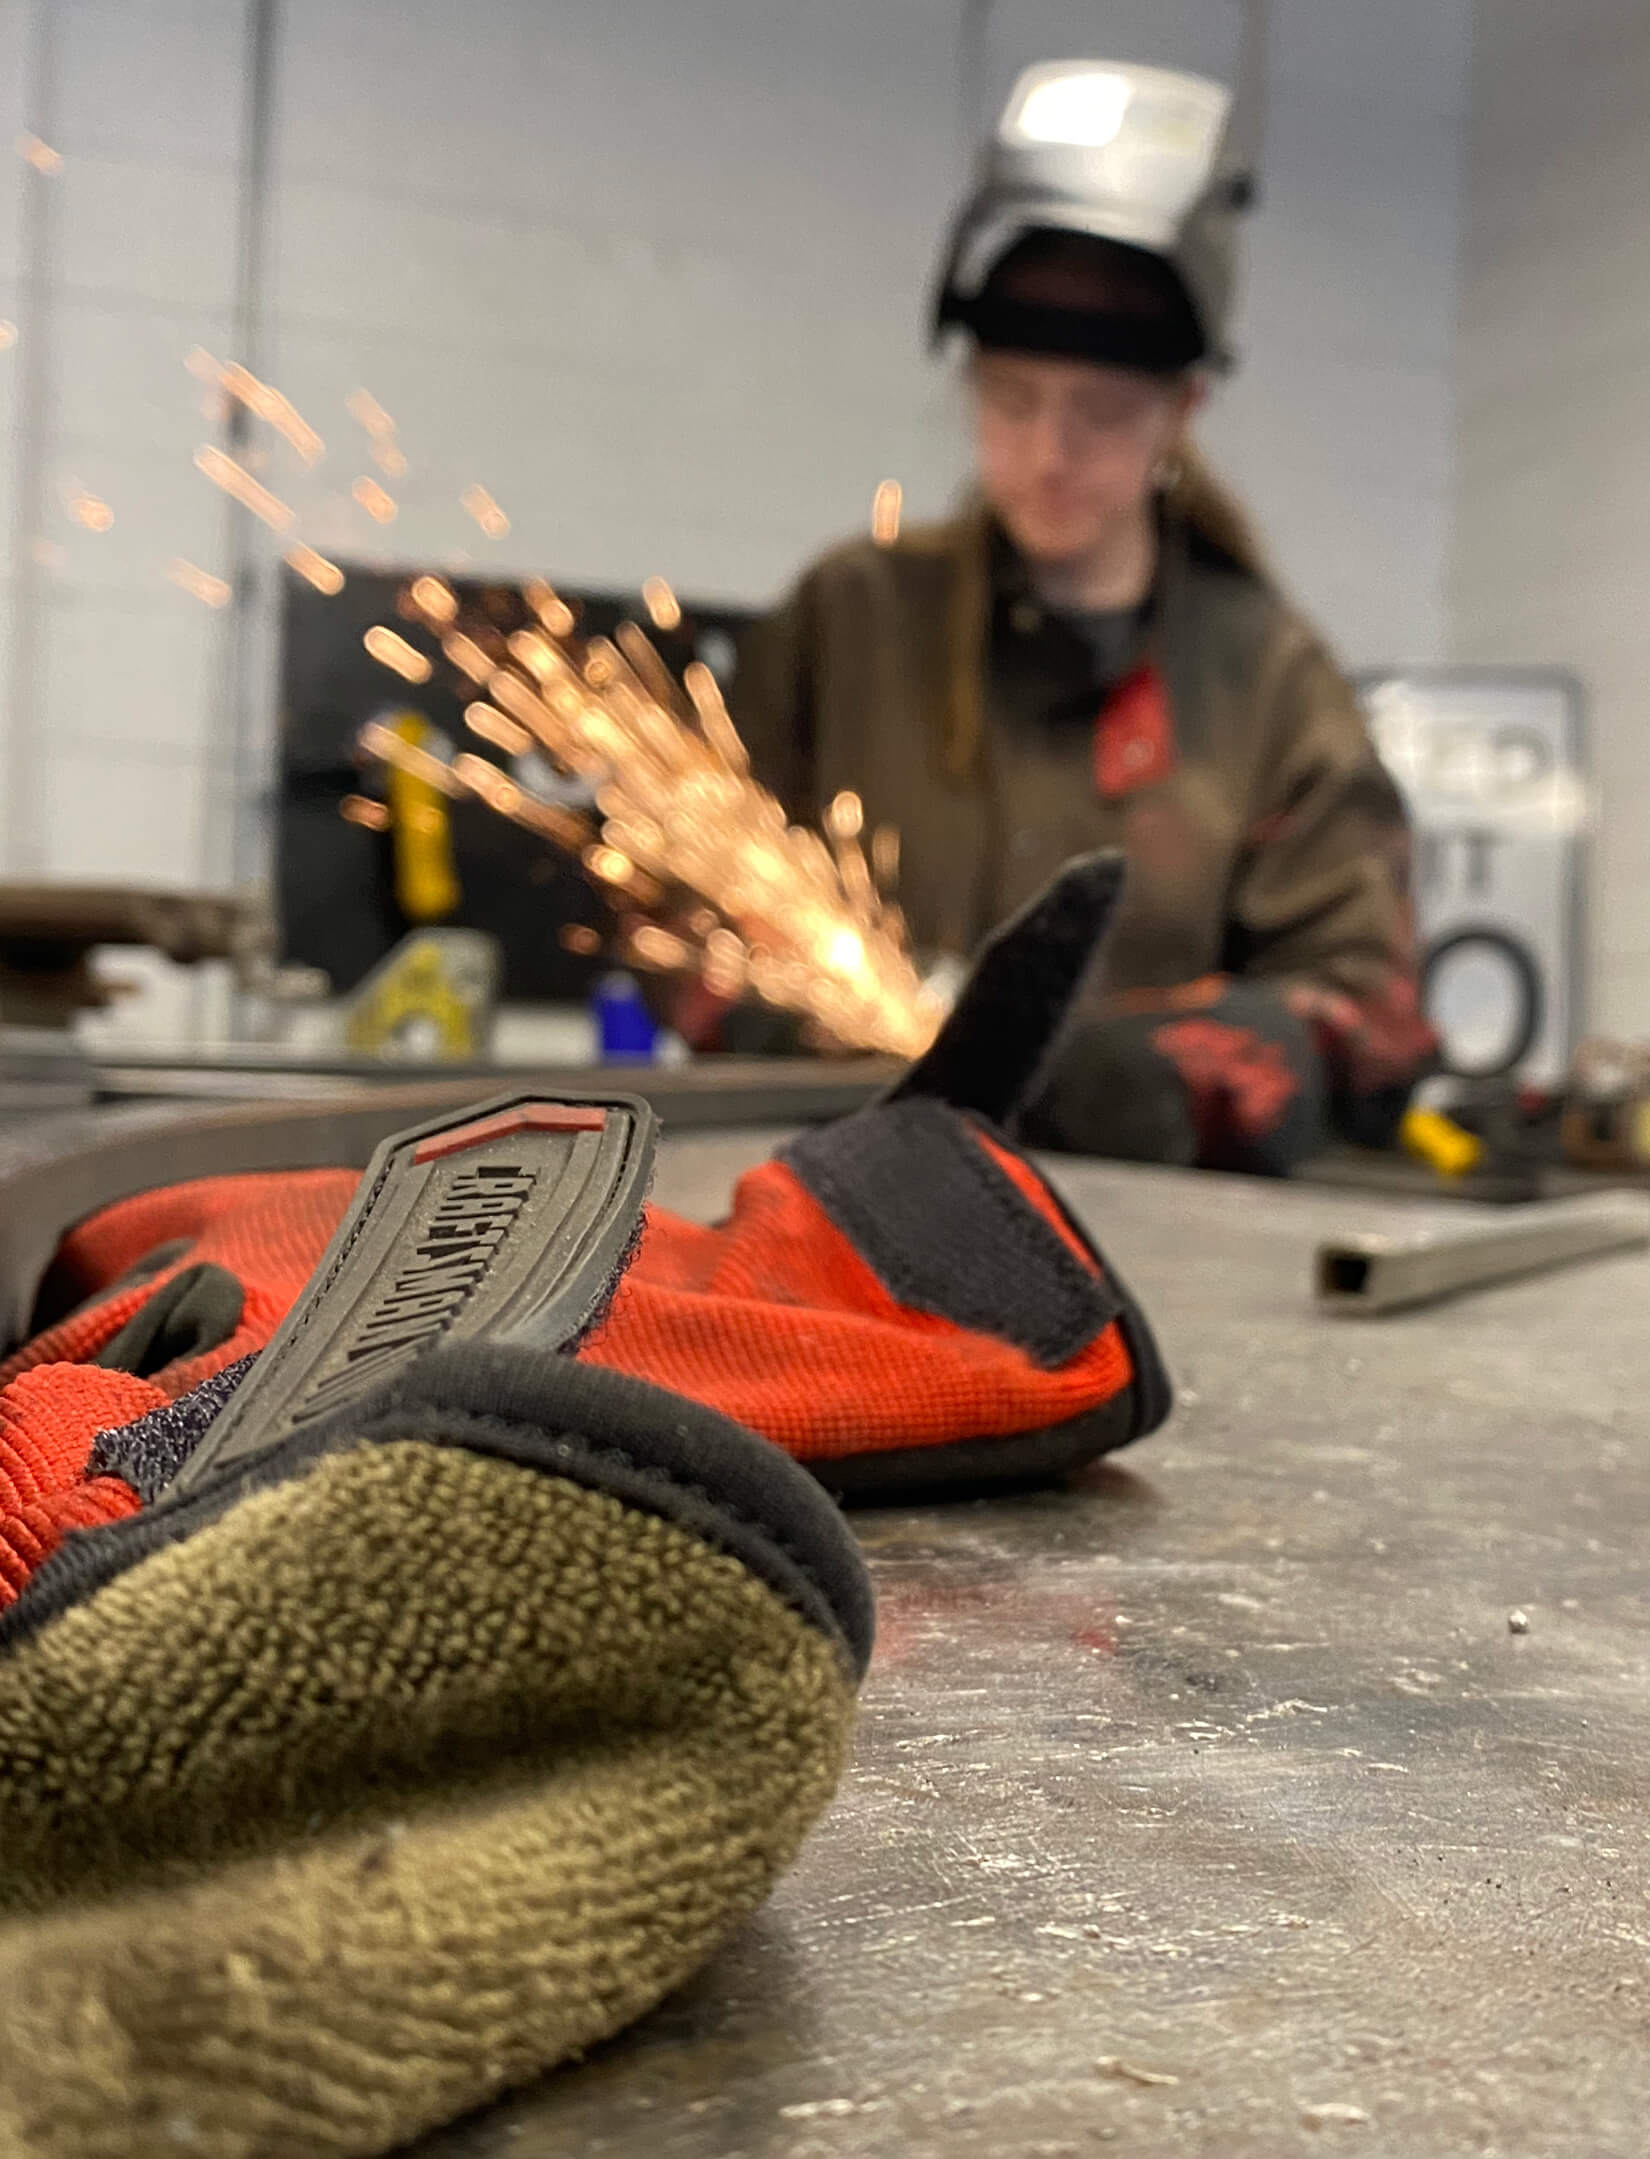 A welding glove sits in the foreground in focus while a student is out of focus in the background welding with sparks flying.